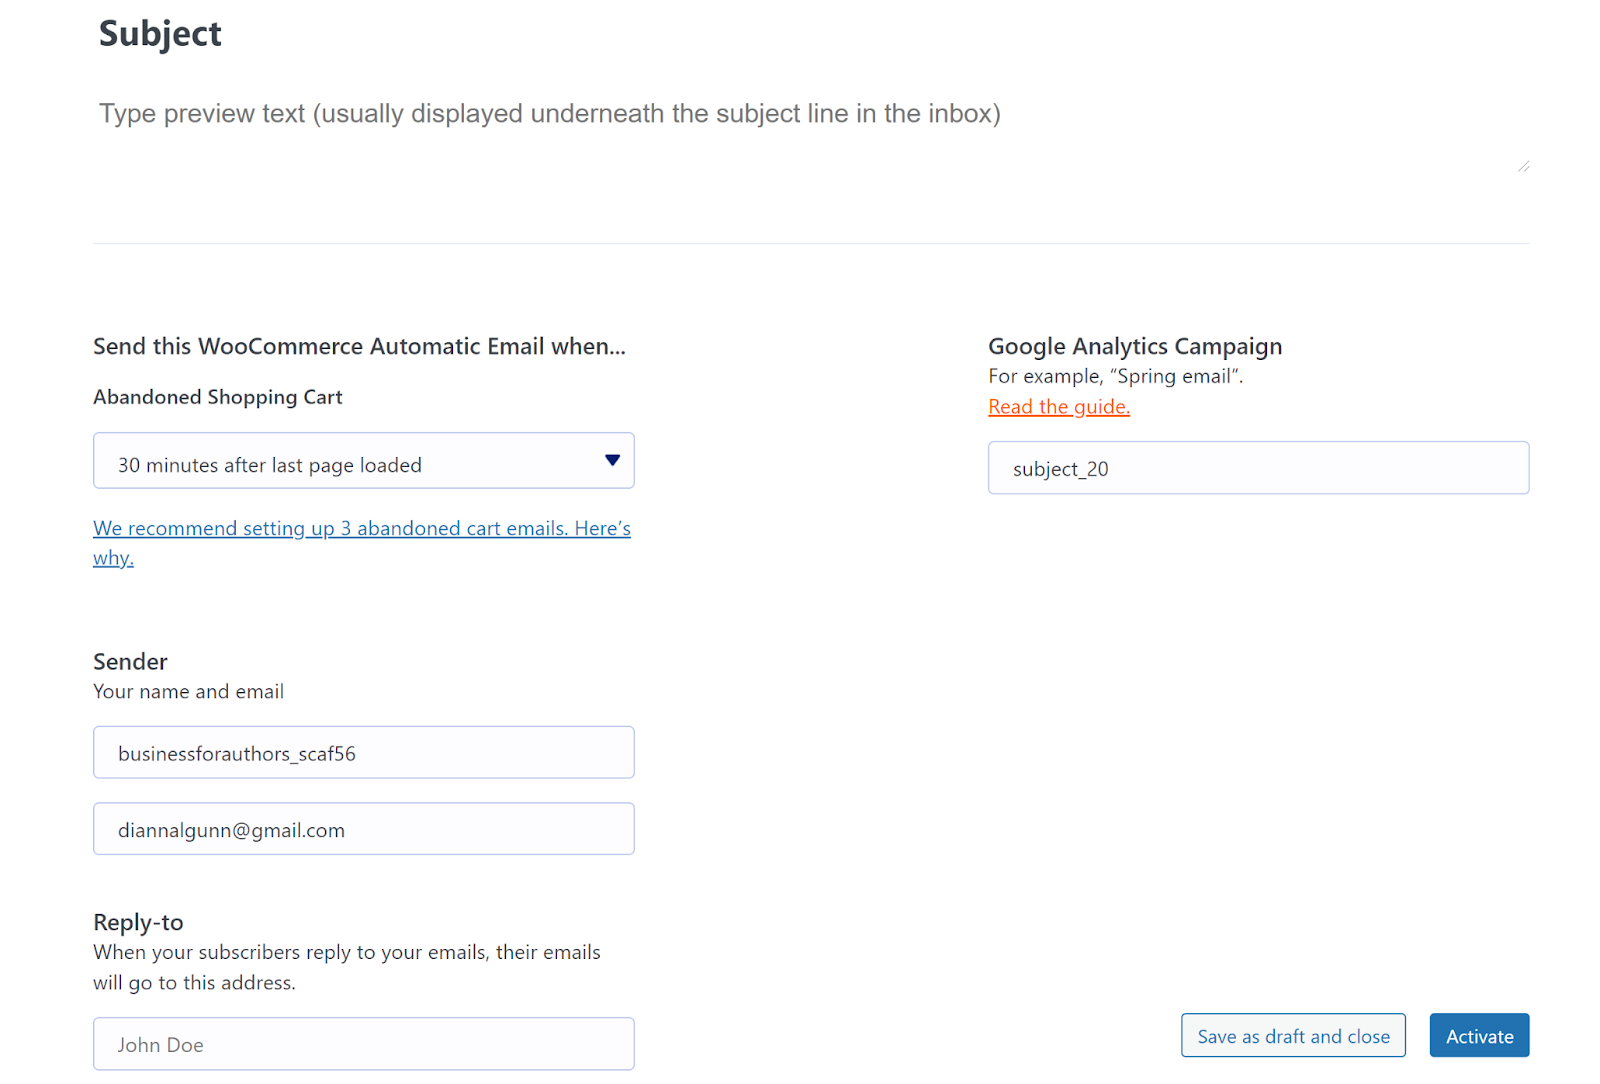 How to send WooCommerce abandoned cart emails in MailPoet: confirm sending details